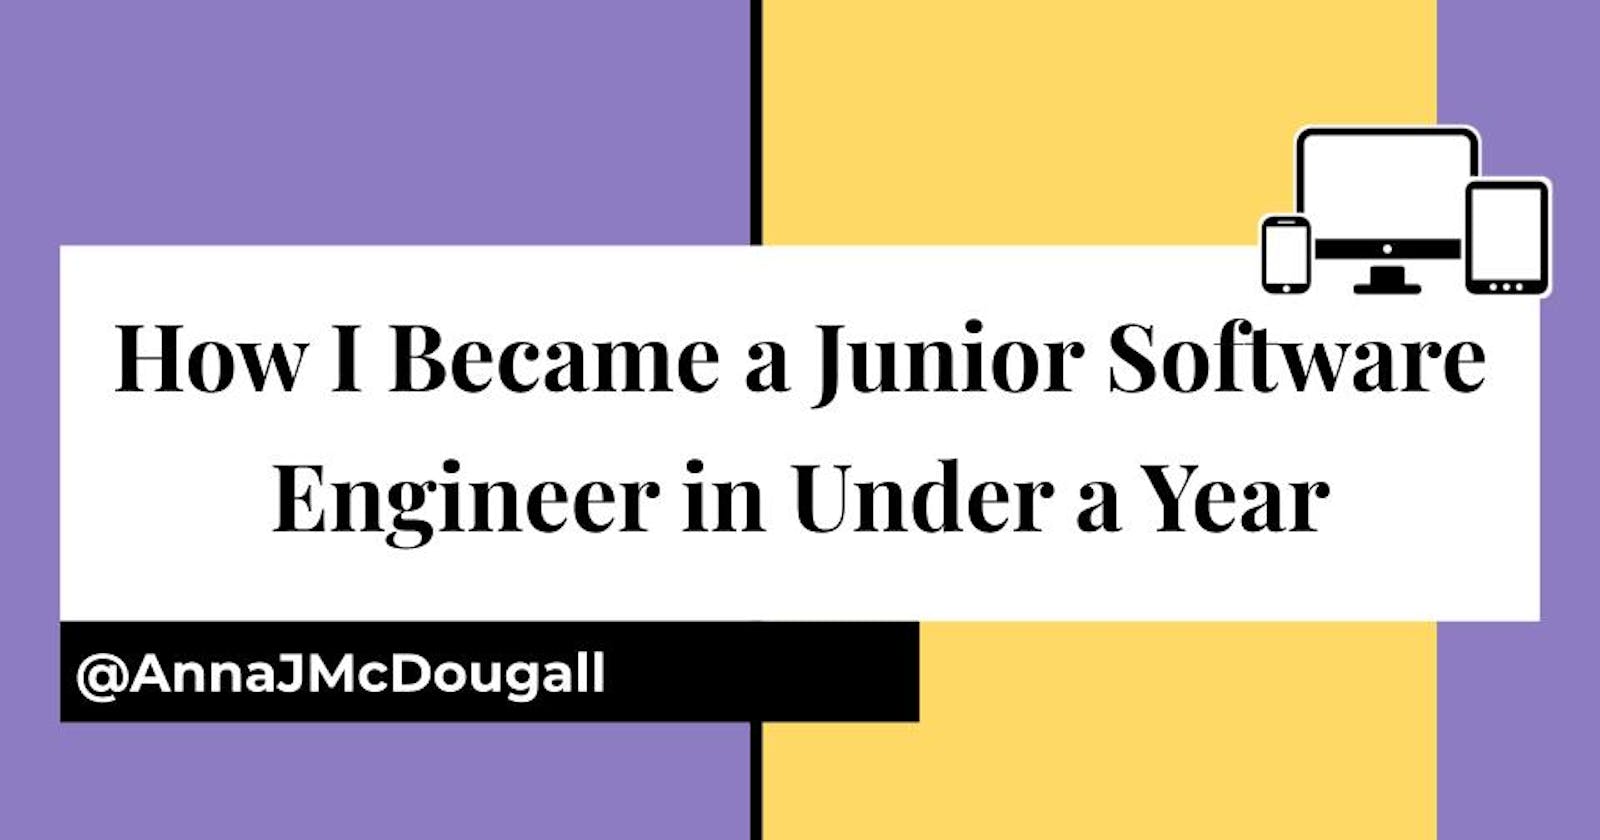 How I Became a Junior Software Engineer in Under a Year